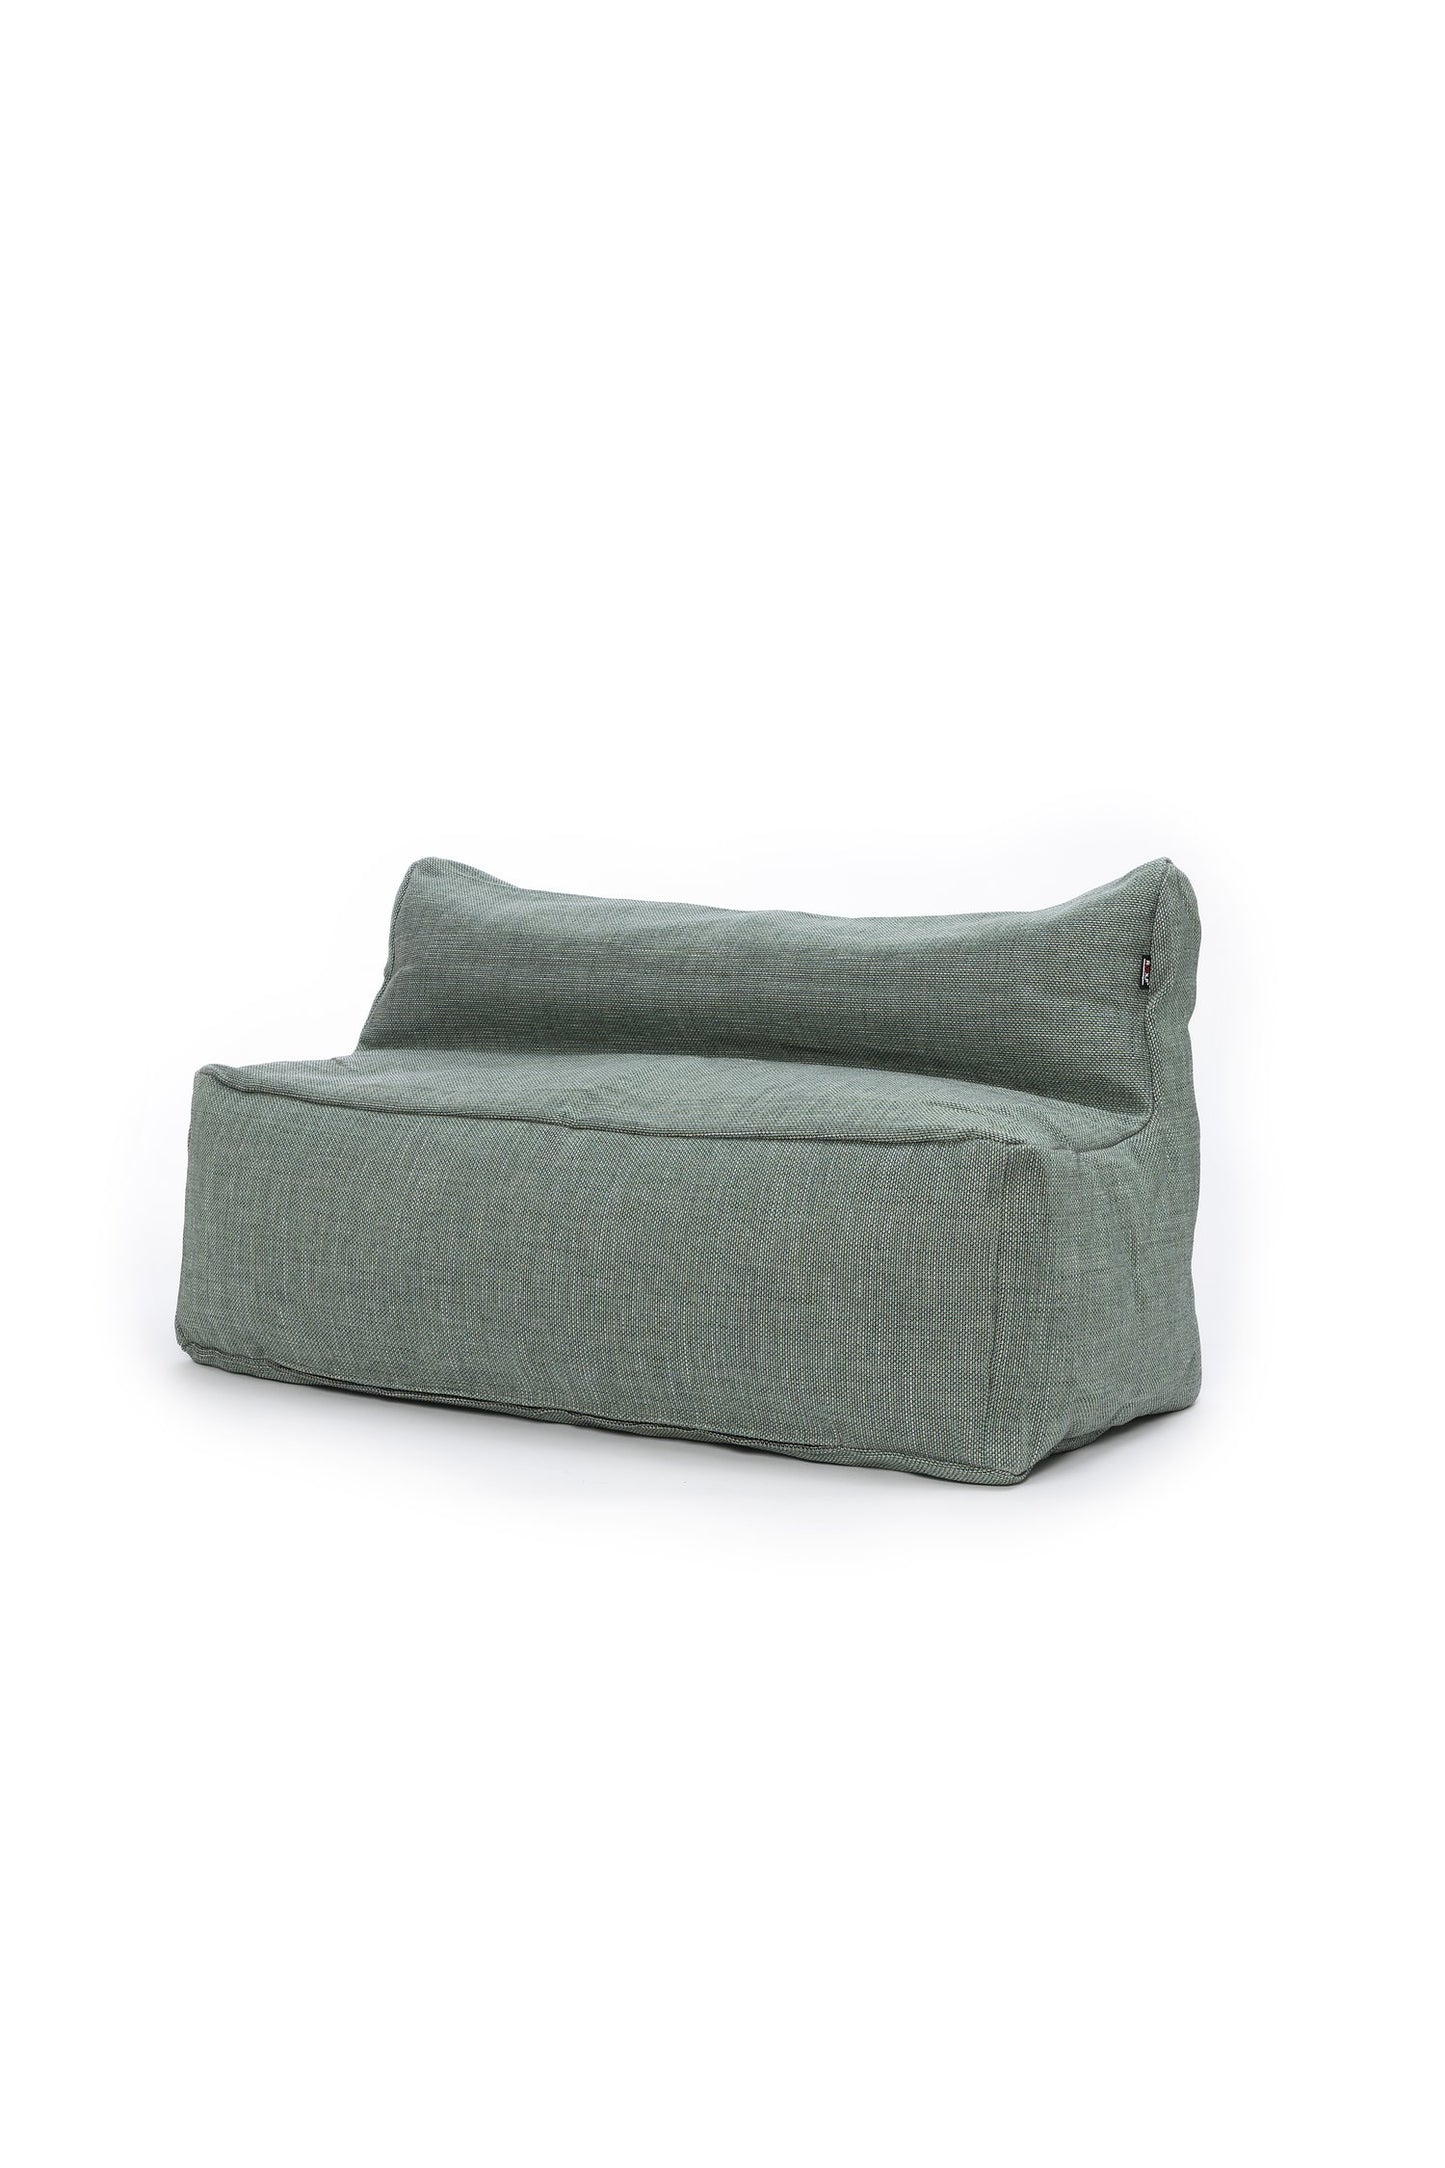 Dotty Love Seat Roolf Living